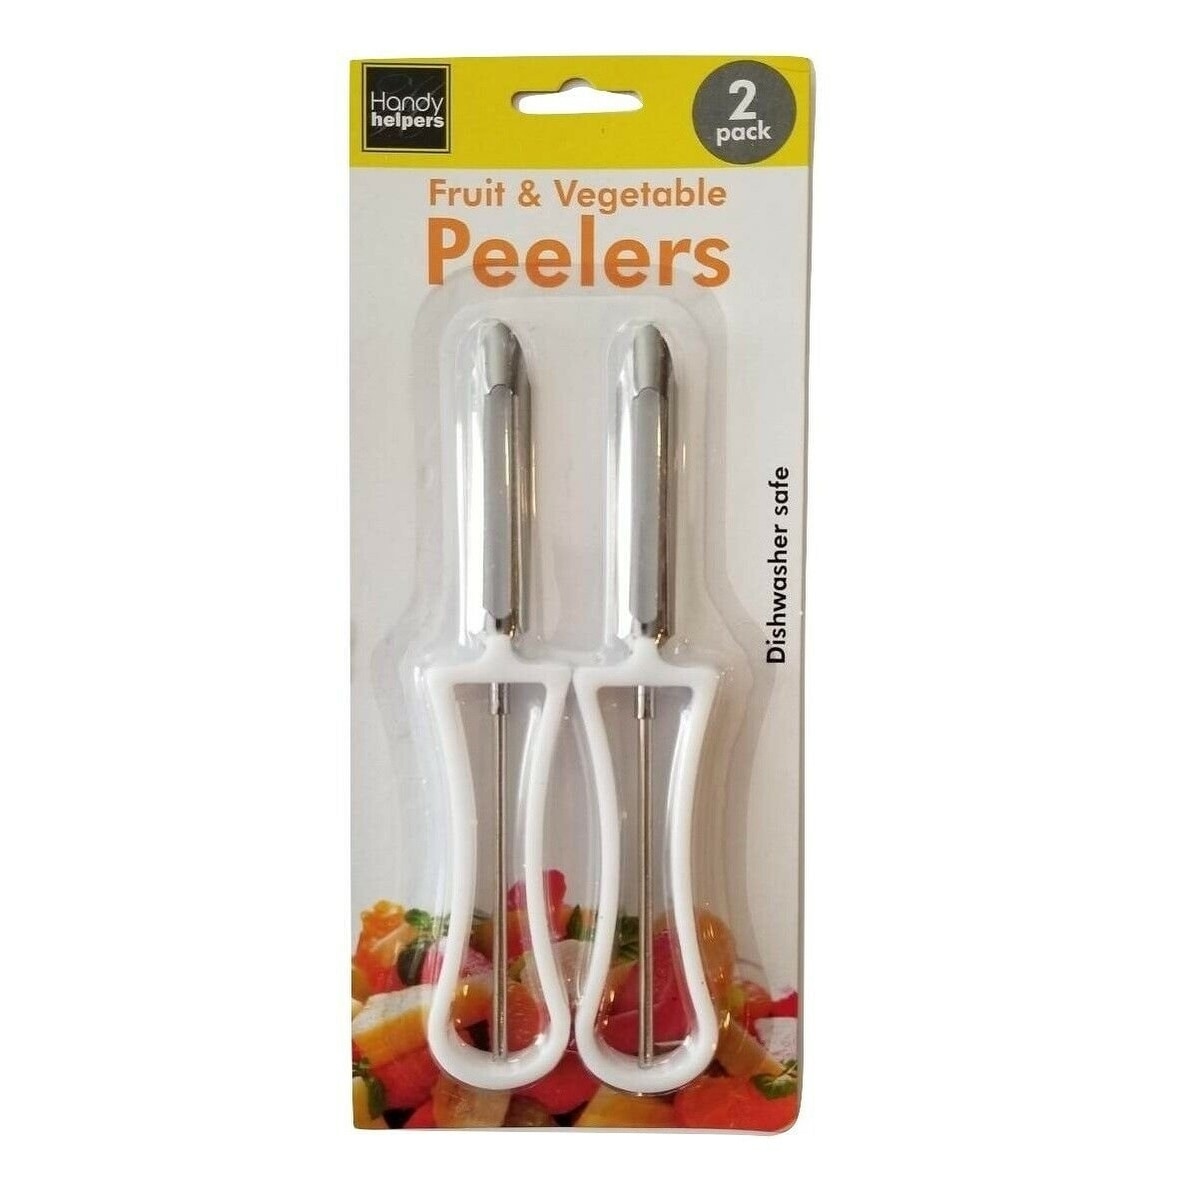 https://ak1.ostkcdn.com/images/products/is/images/direct/7b6d3ea89ed6c2499a3598e193c6d2db61c6d162/2-Piece-Fruit-%26-Vegetable-Swivel-Blade-Peeler-Set---Great-for-Apples%2C-Carrots-and-Potatoes.jpg